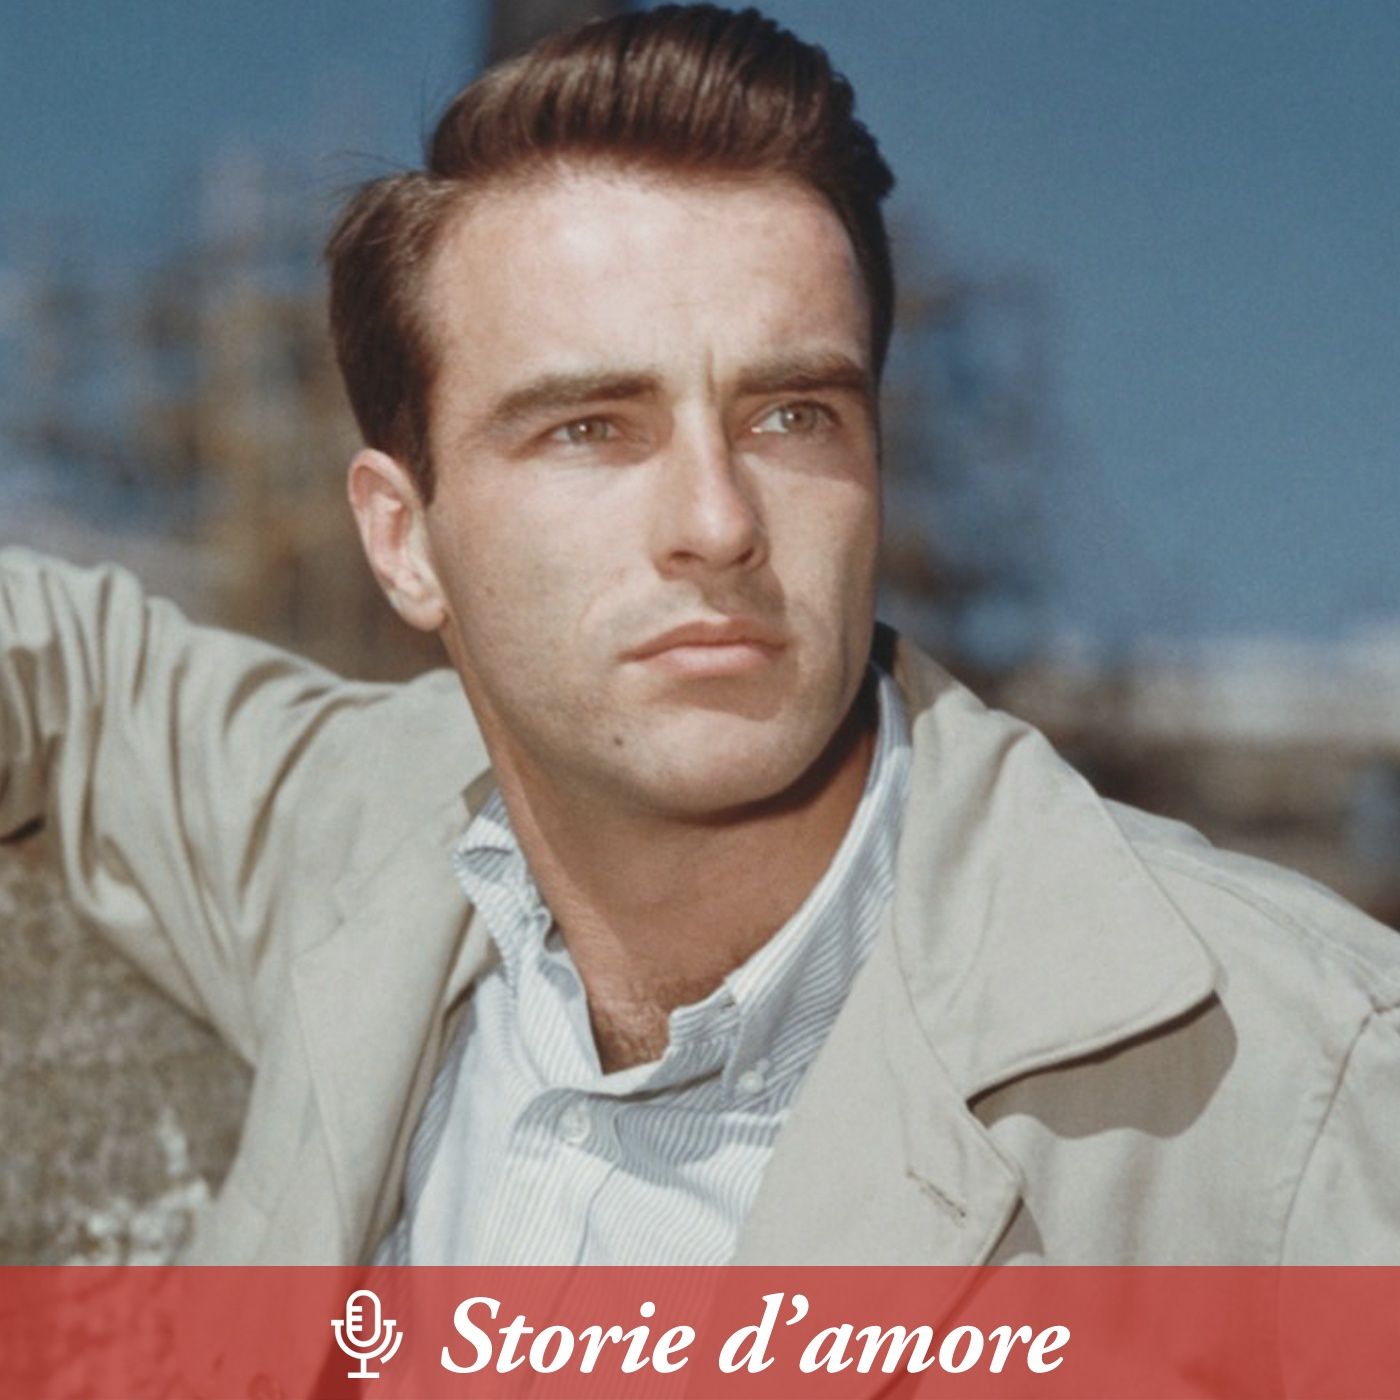 Montgomery Clift, l'angelo tormentato che stregò Hollywood